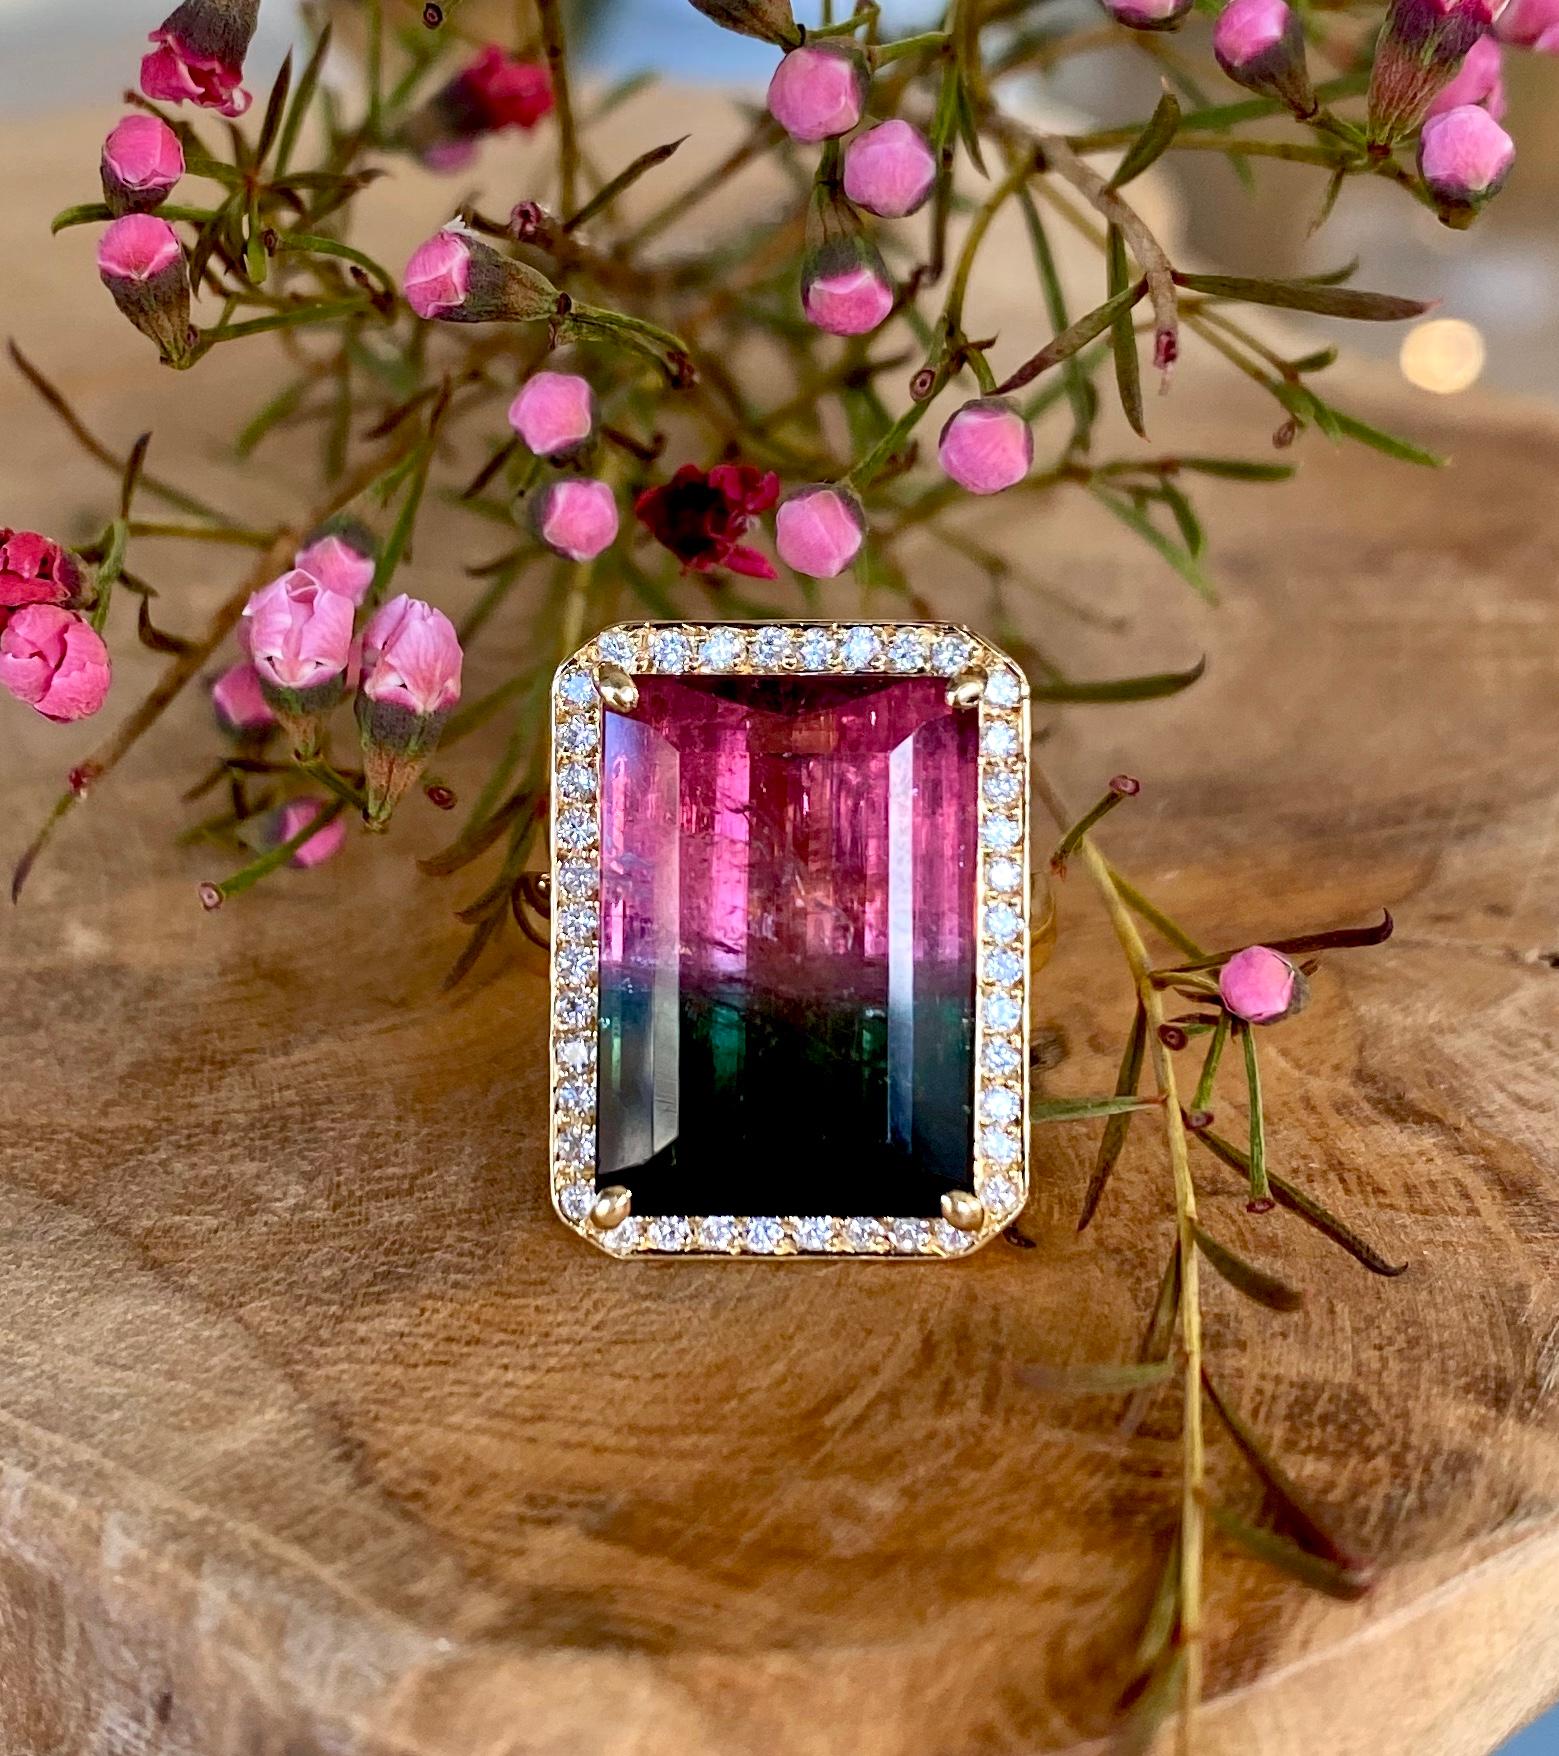 Joon Han stunning one-of-a-kind bicolor watermelon tourmaline cocktail ring of 17.29 carats, surrounded by white diamonds and handcrafted in 18 karat yellow gold. 

If you’re looking for an exquisite bicolor watermelon tourmaline, look no further